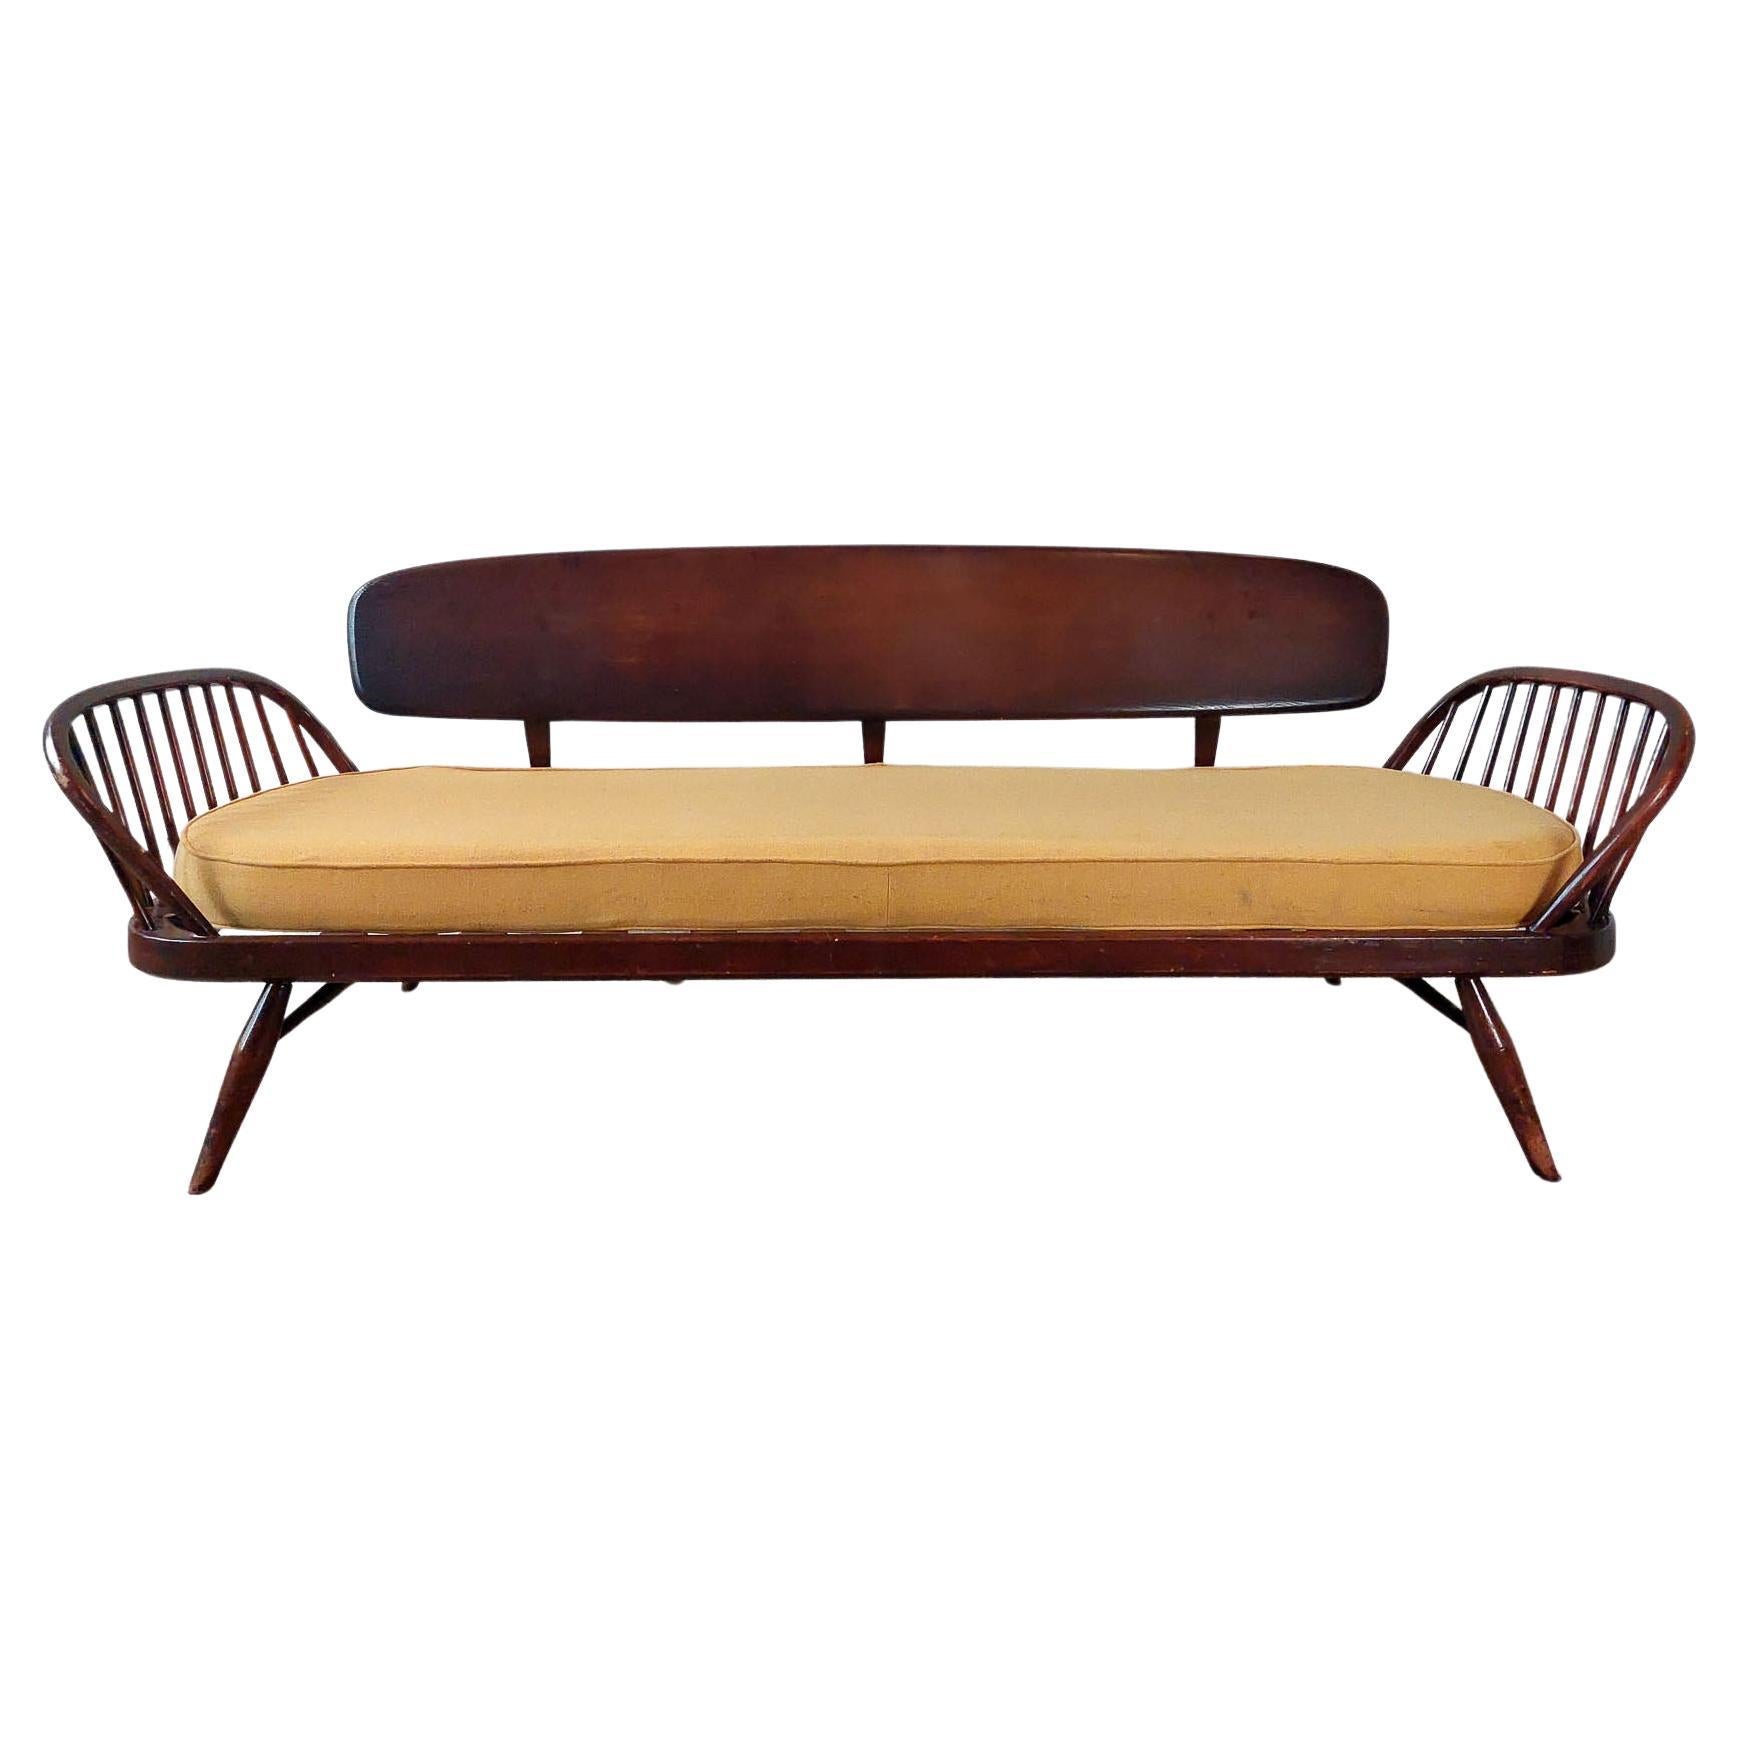 Vintage Ercol daybed studio sofa For Sale